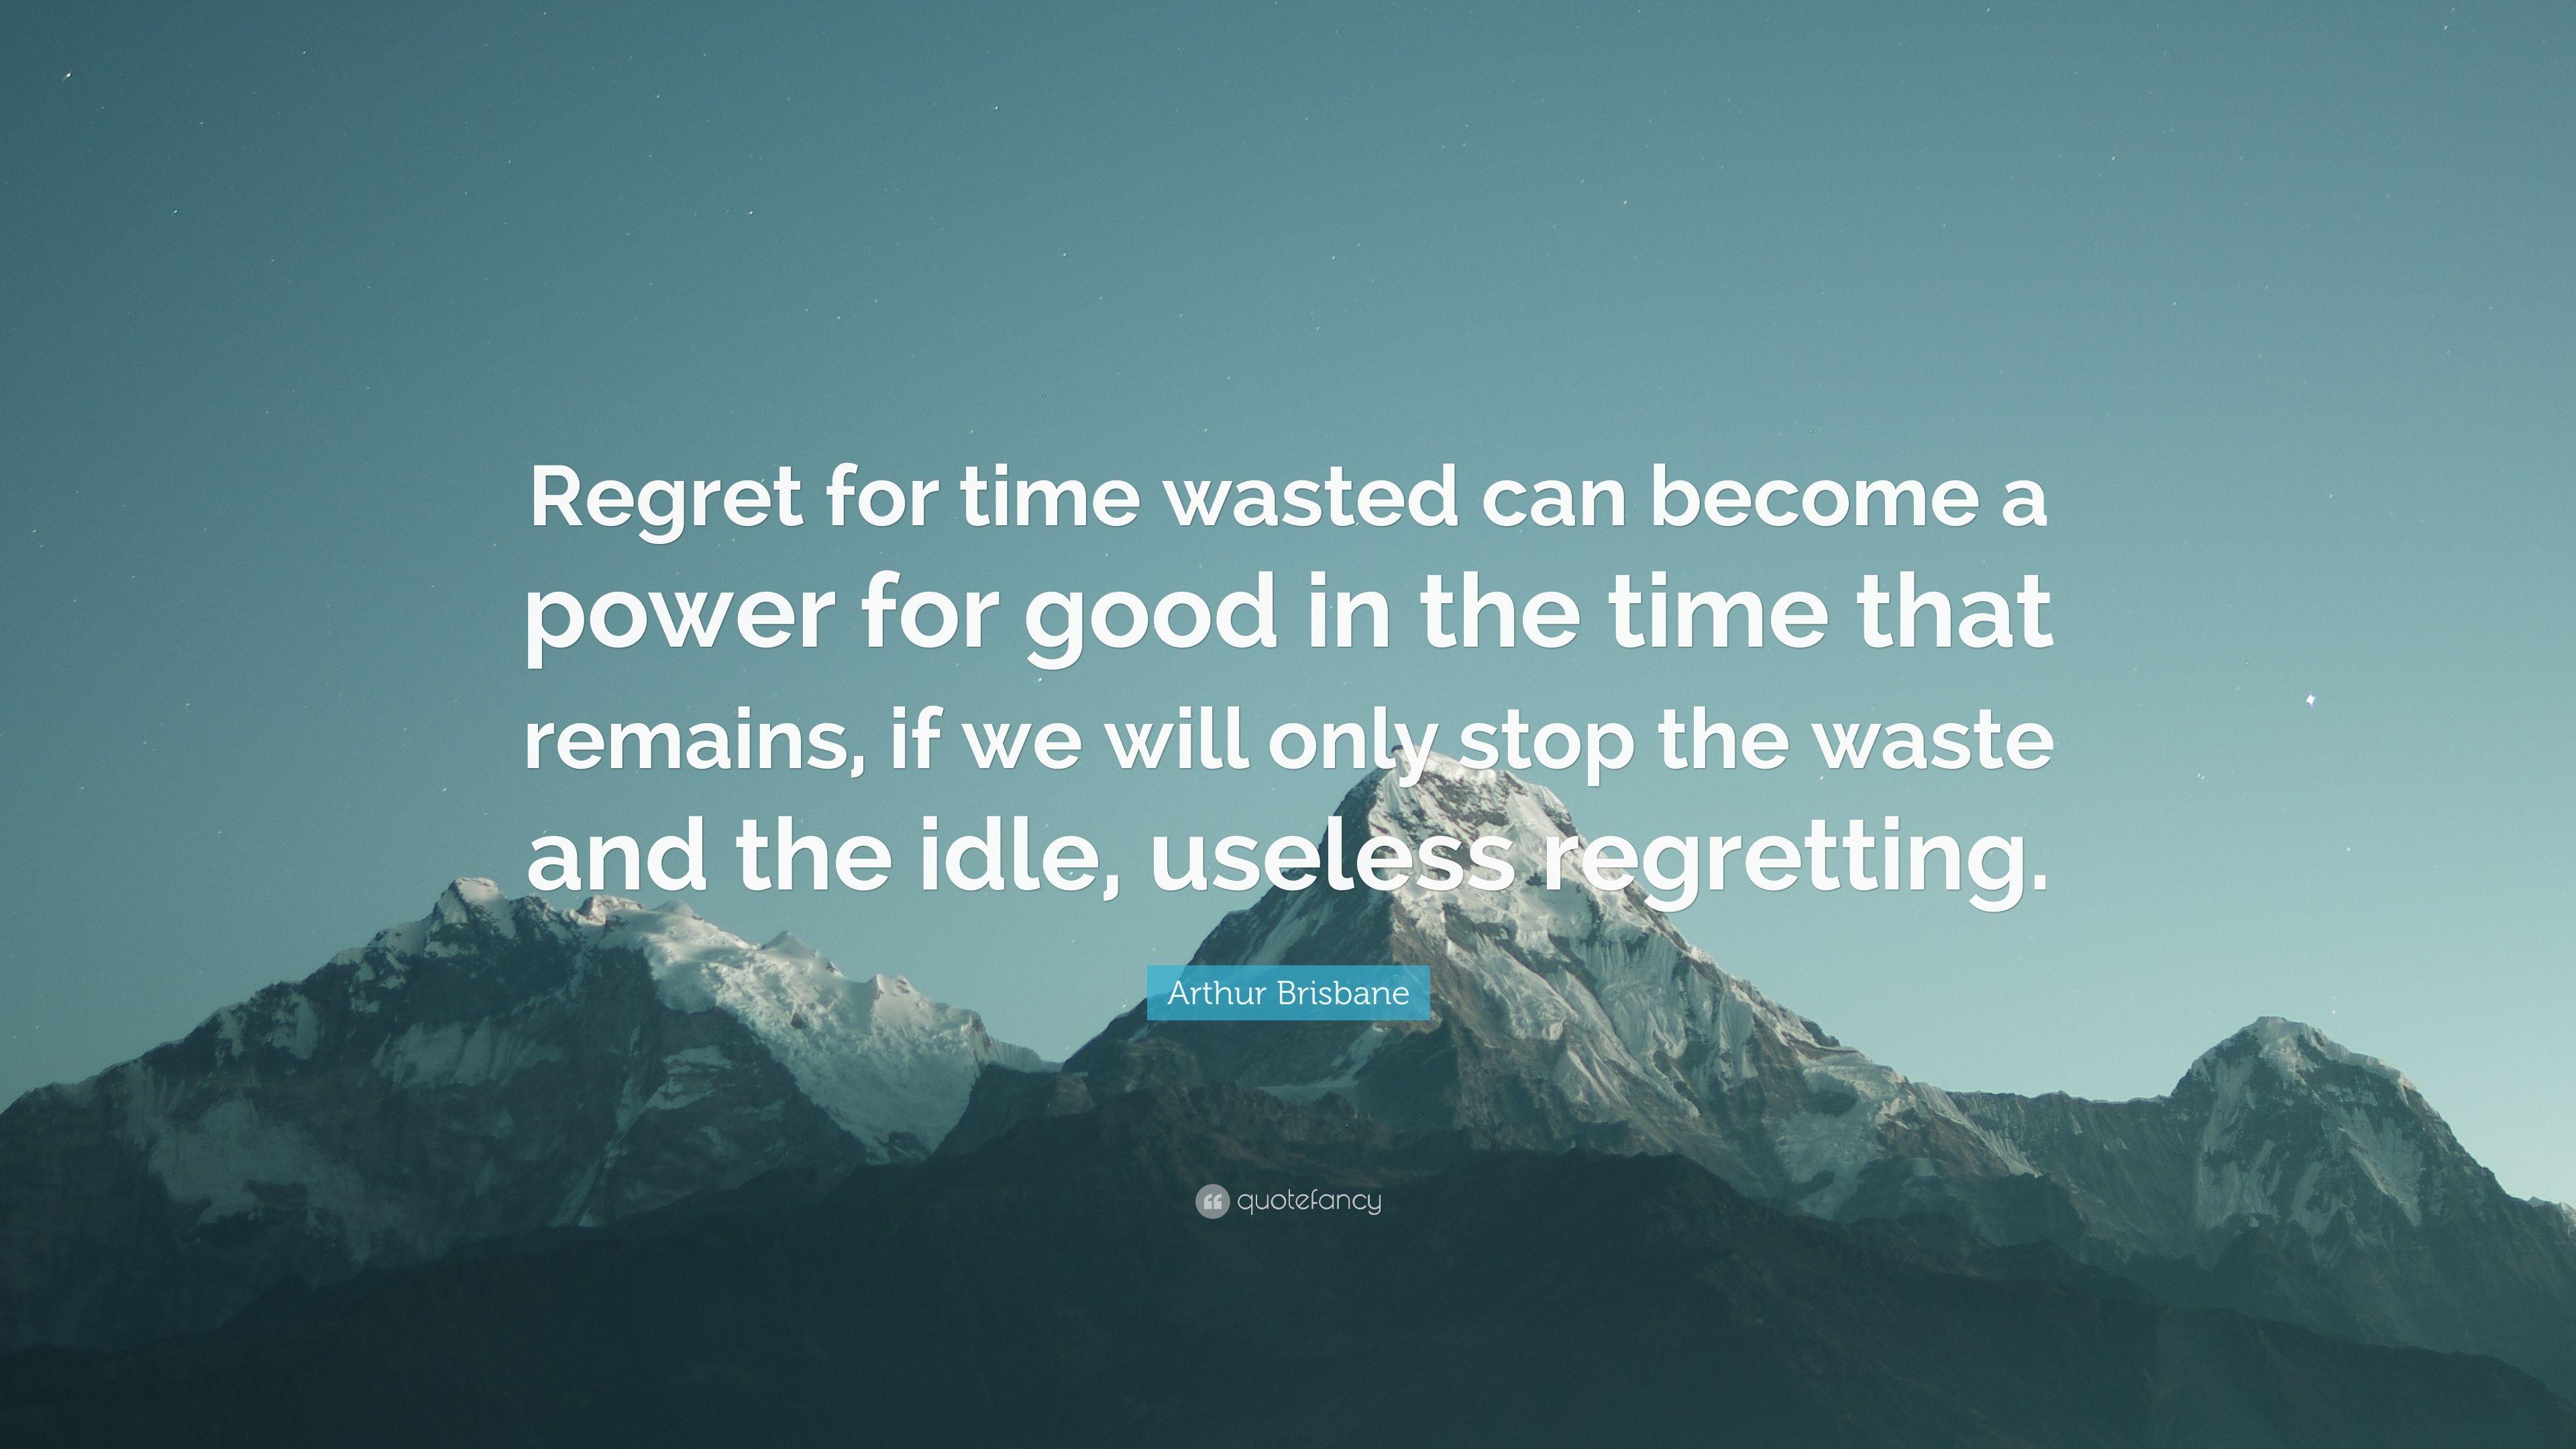 Arthur Brisbane Quote: “Regret for time wasted can become a power